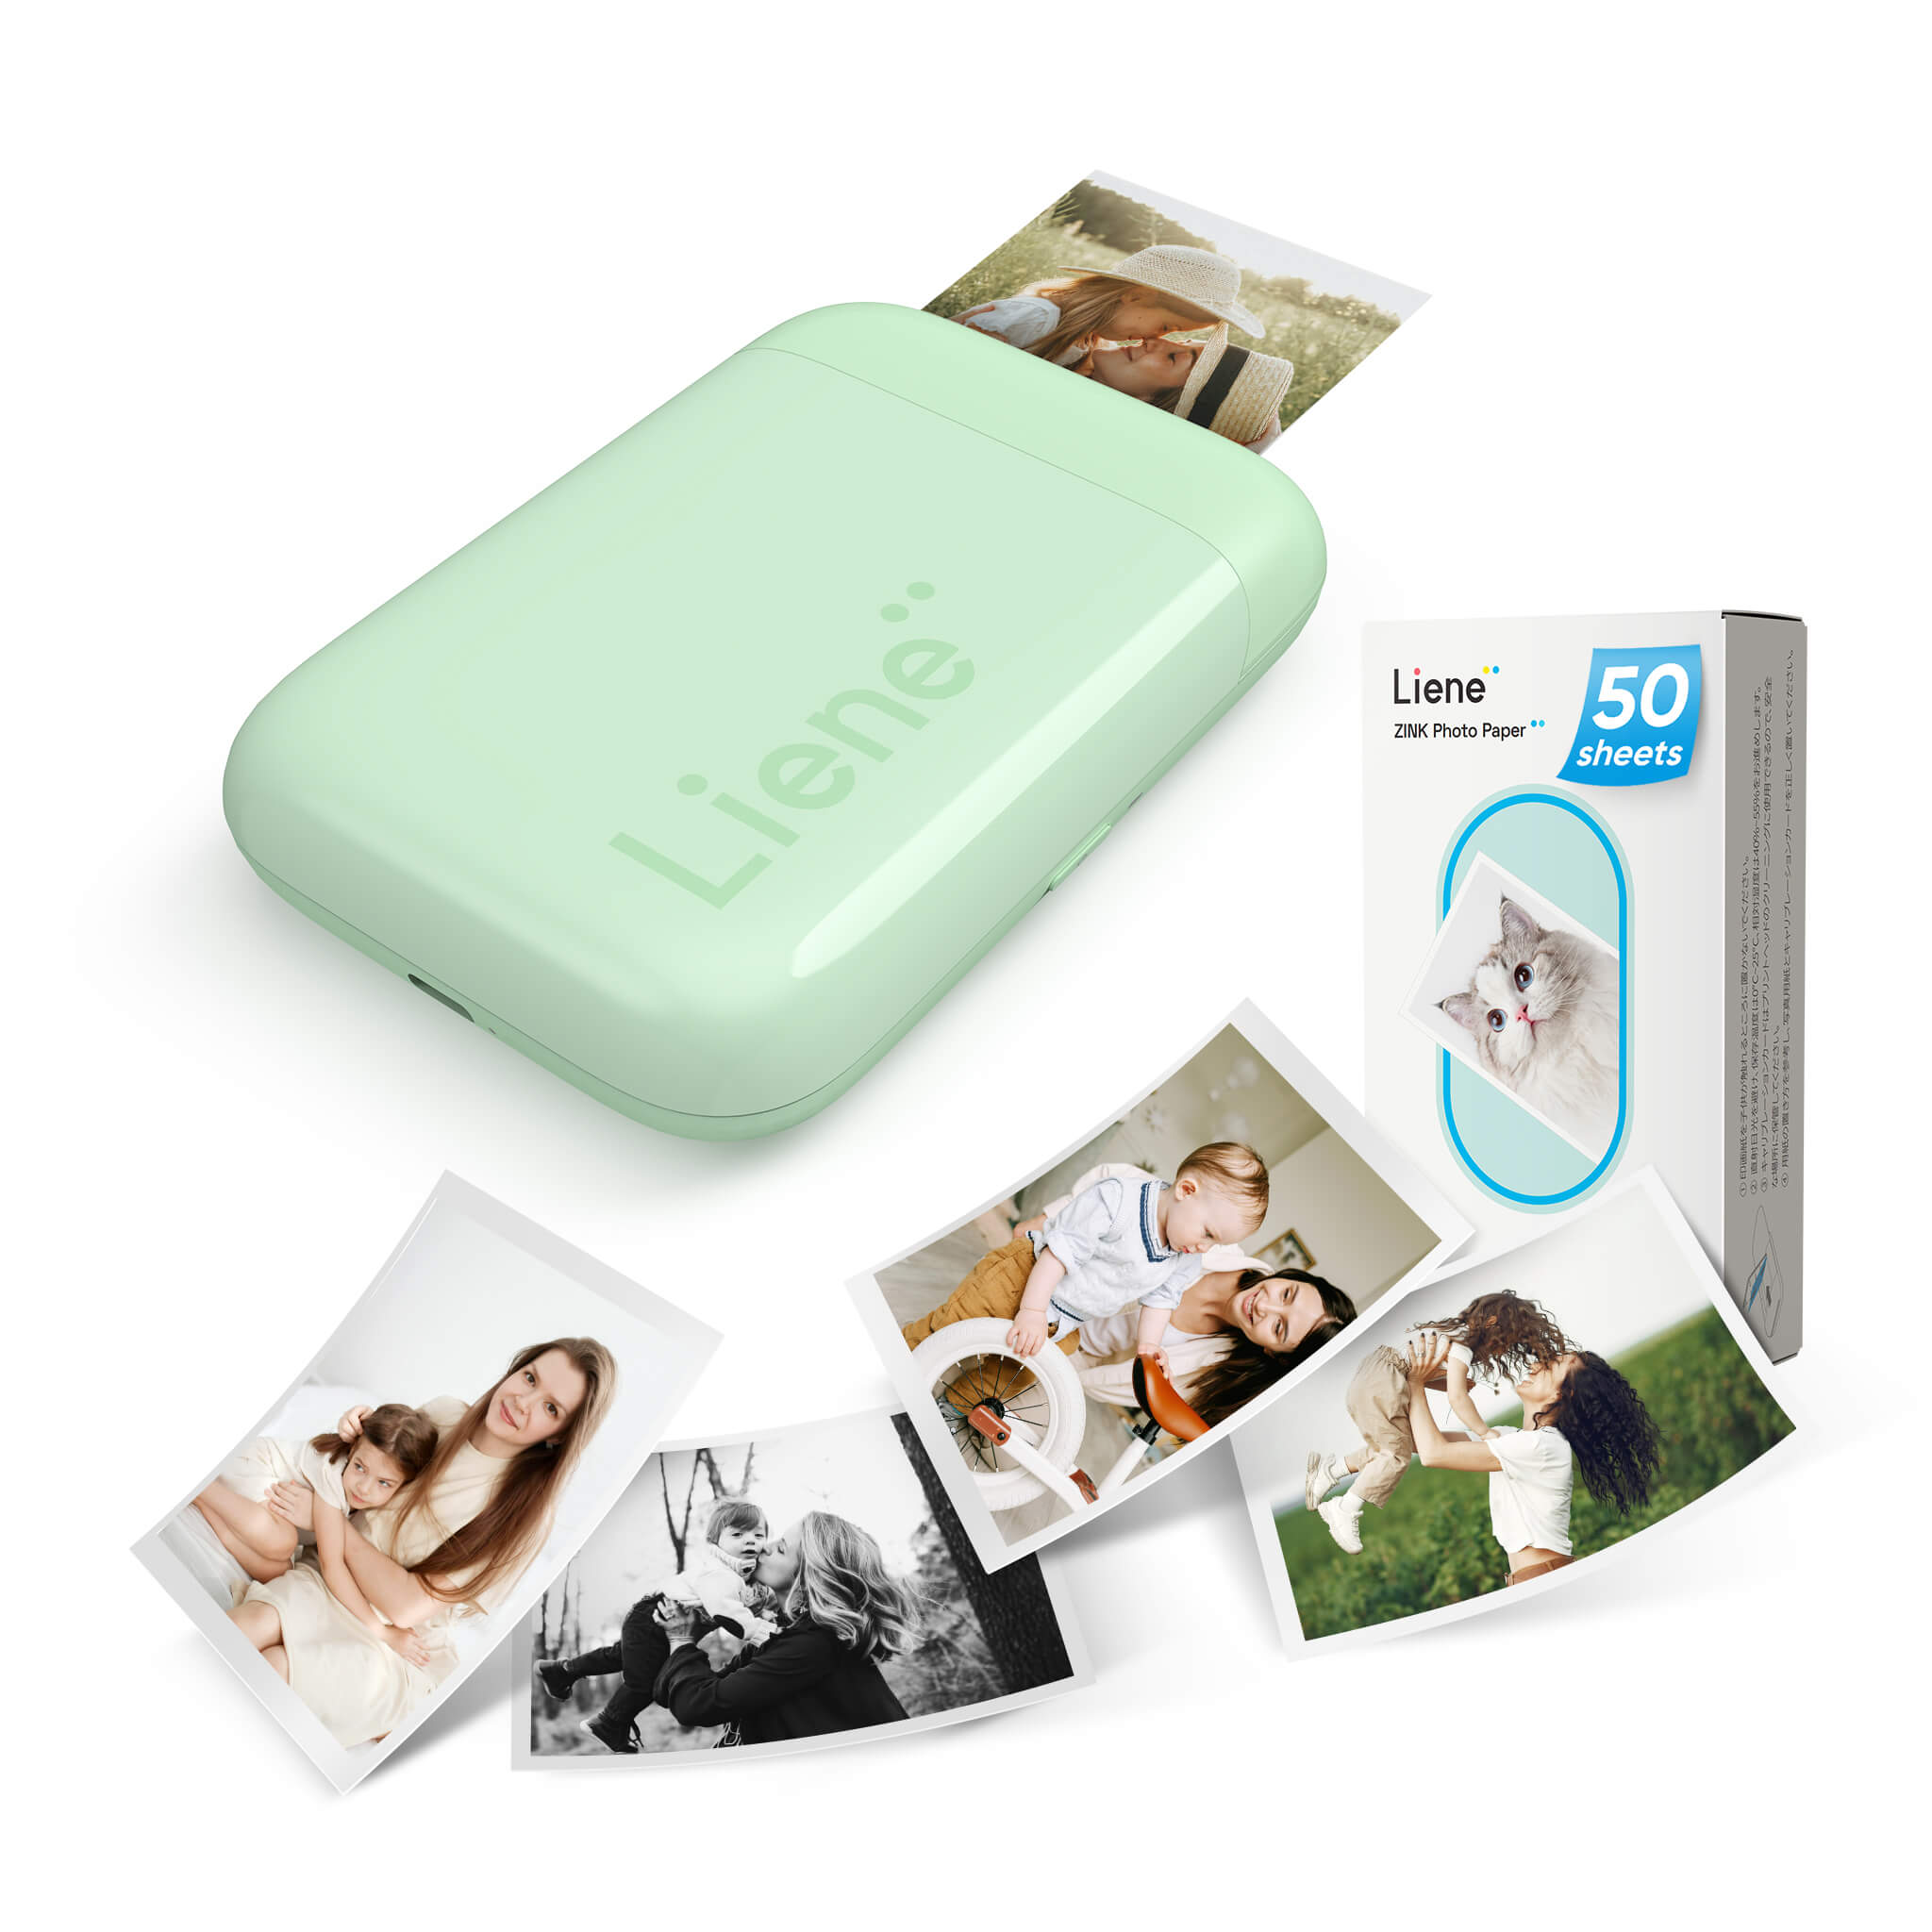 Liene Pearl K100 2x3" Portable Photo Printer - White (50 Zink Photo Papers)